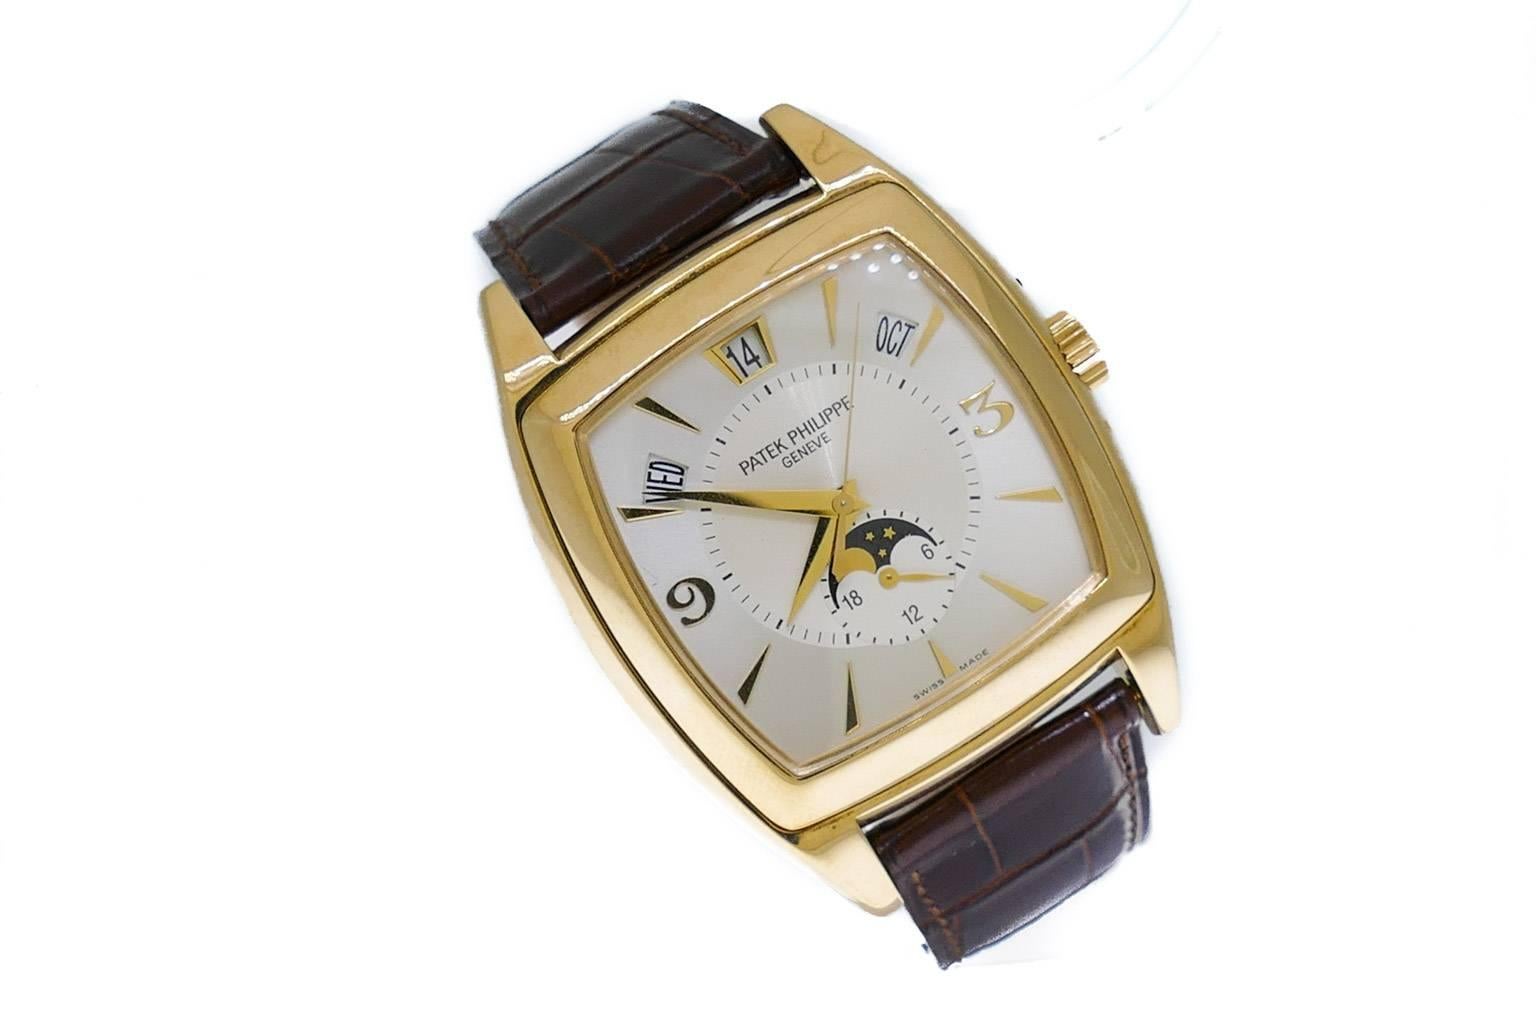 Mens (40mm) Patek Philippe Gondolo Annual Calendar in 18k Yellow Gold, Ref 5135J. The Watch is in Excellent Condition With Some Small Superficial Scratches and all Functions Work Great. Included With the Watch are its Stylus Pusher, Manuals &